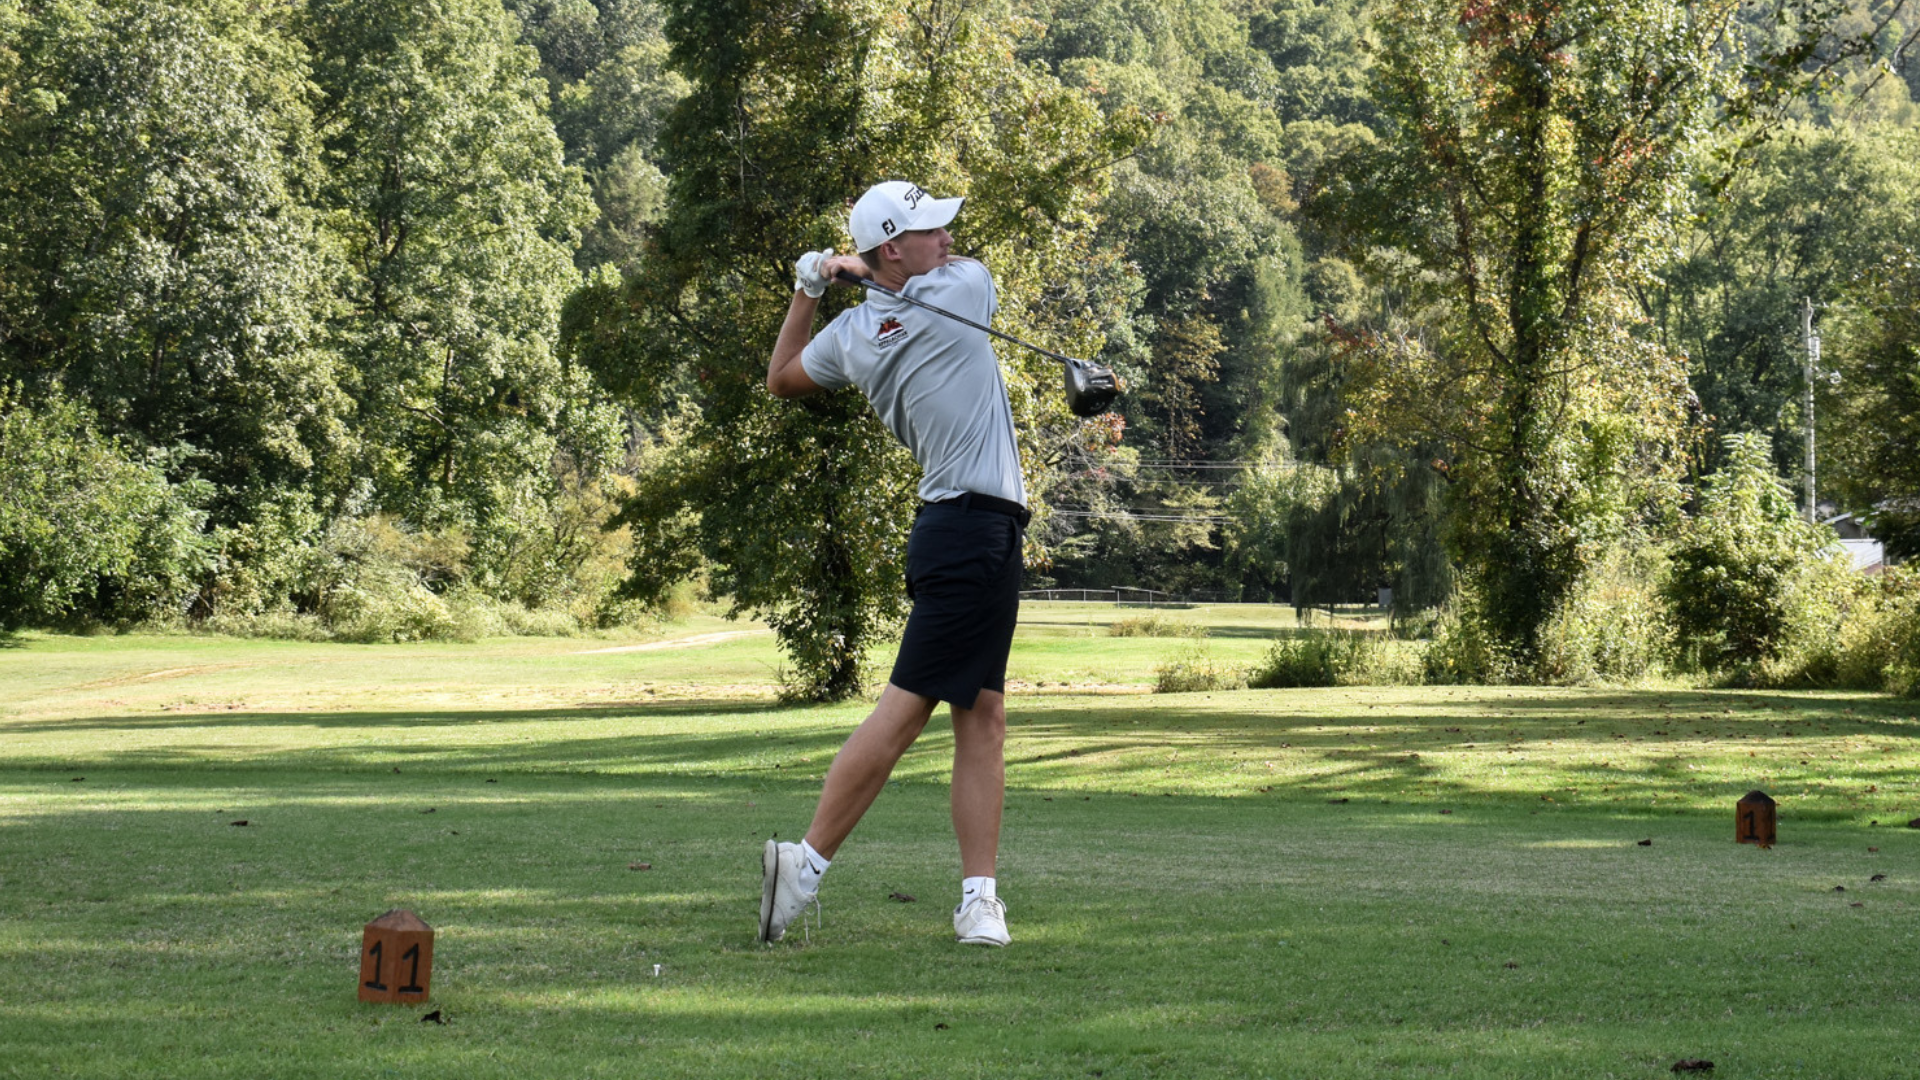 Union men&rsquo;s golf recap from the Indy at Gibson Bay